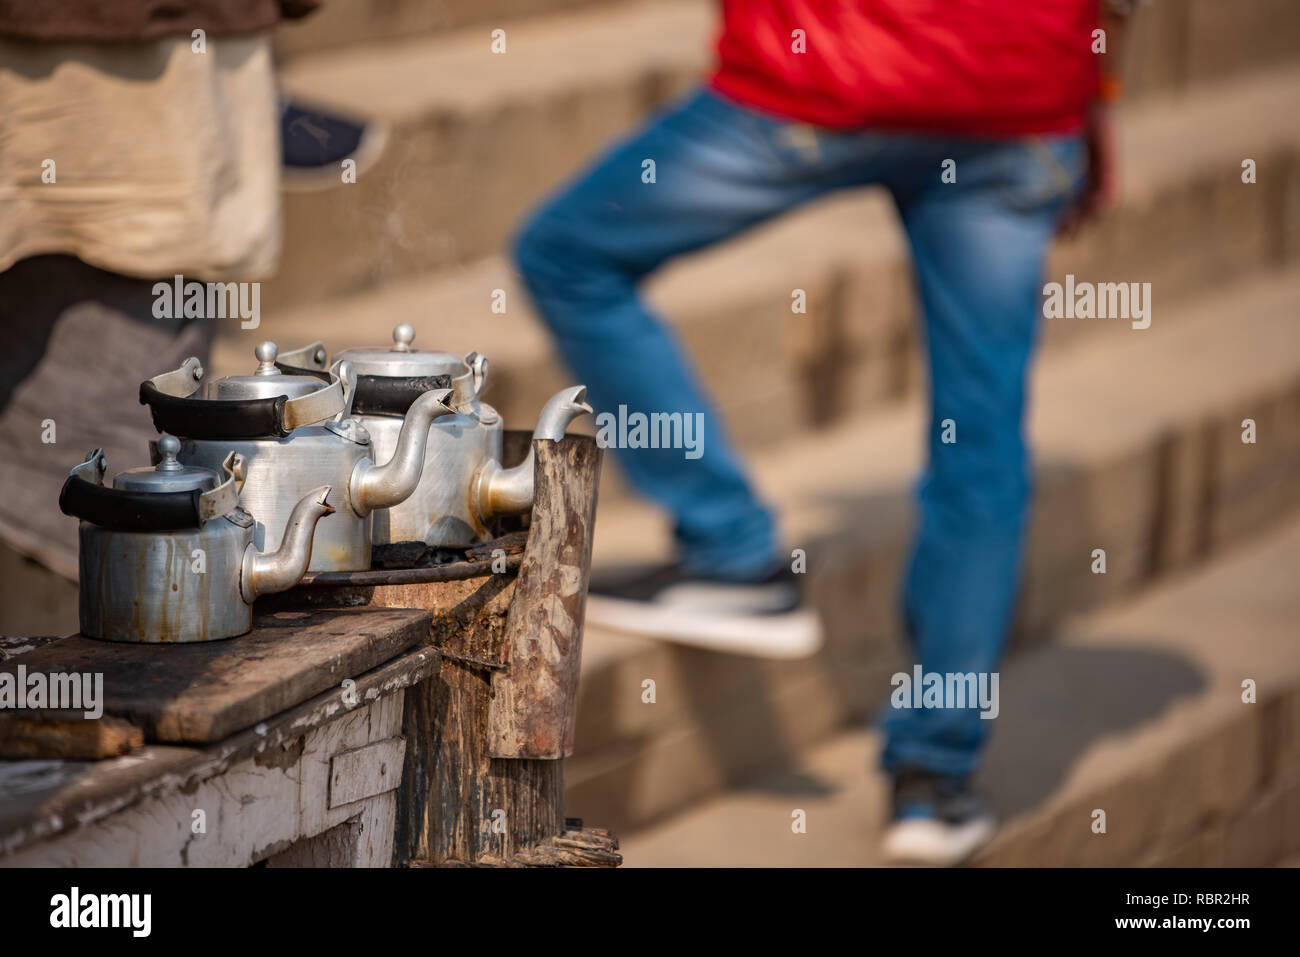 Three tea kettles and two legs in Varanasi, India: A man in a red top and blue jeans stands in the background while three tea kettles simmer away. Stock Photo